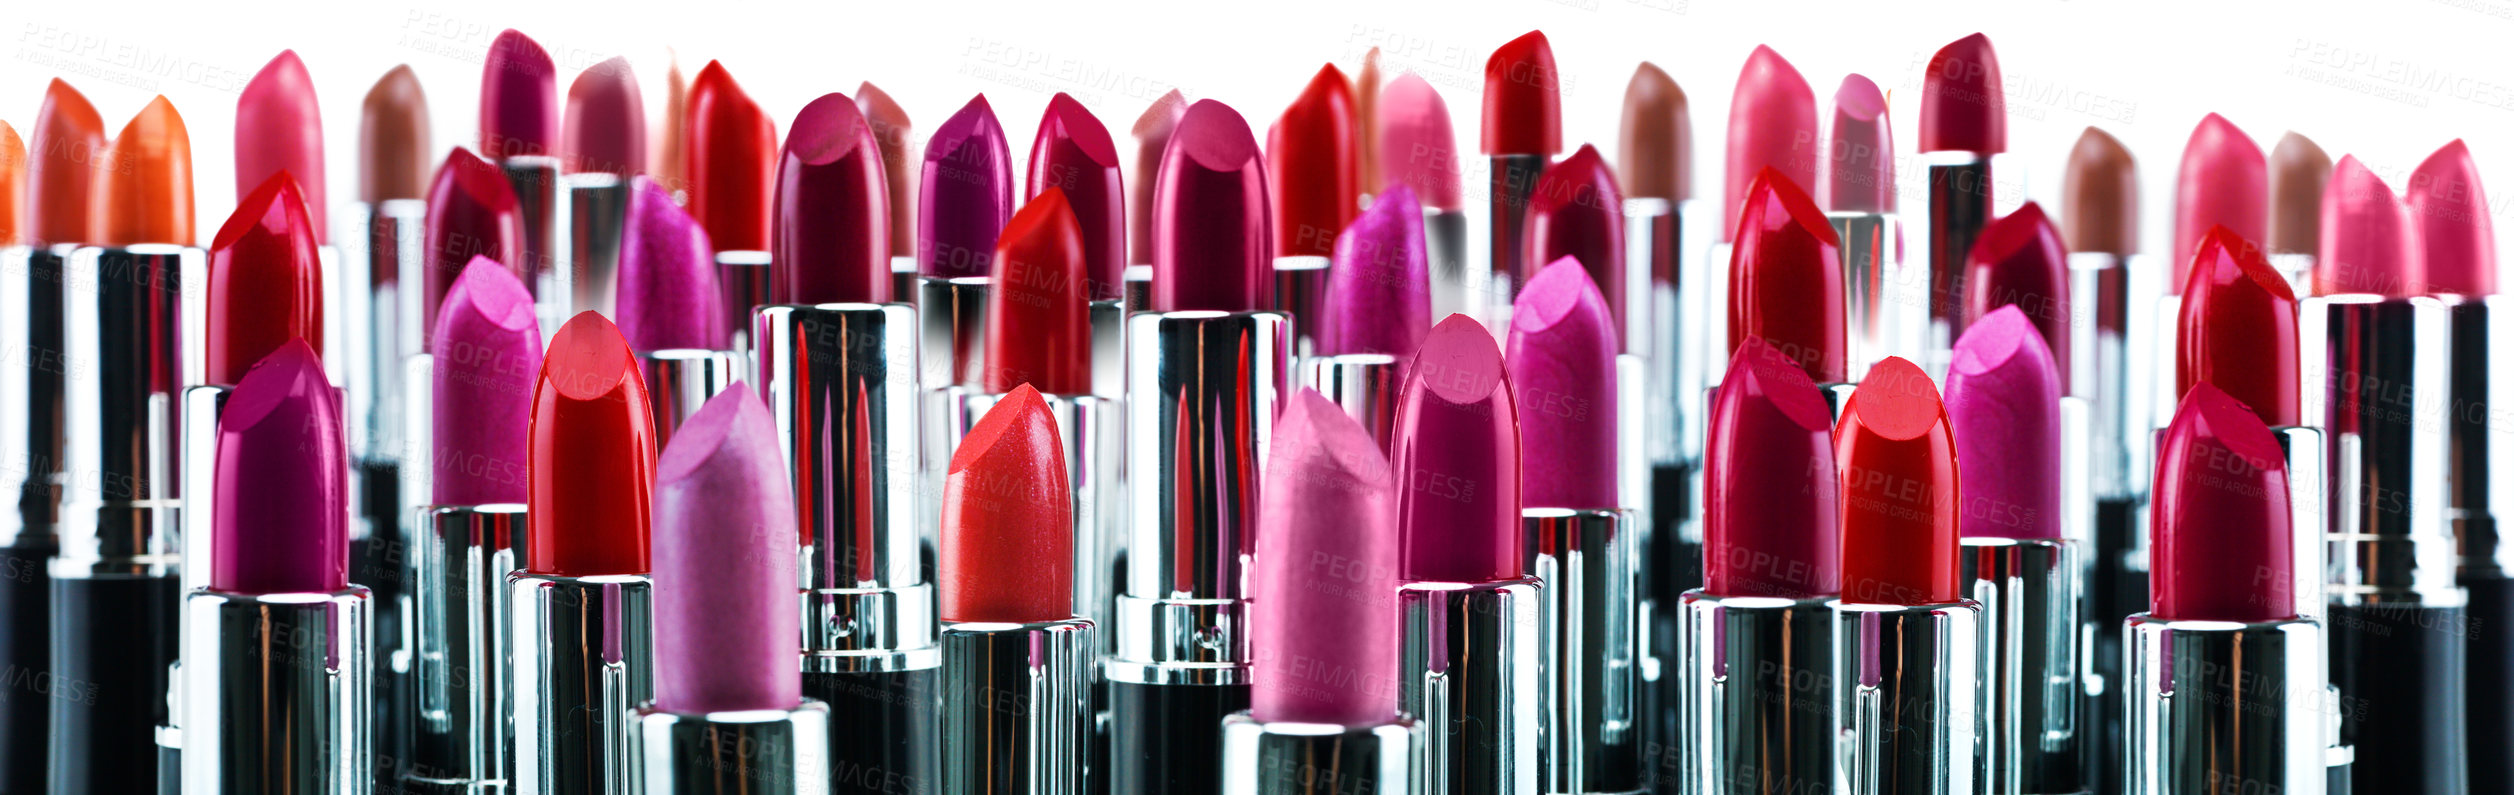 Buy stock photo A studio shot of many different colored lipsticks